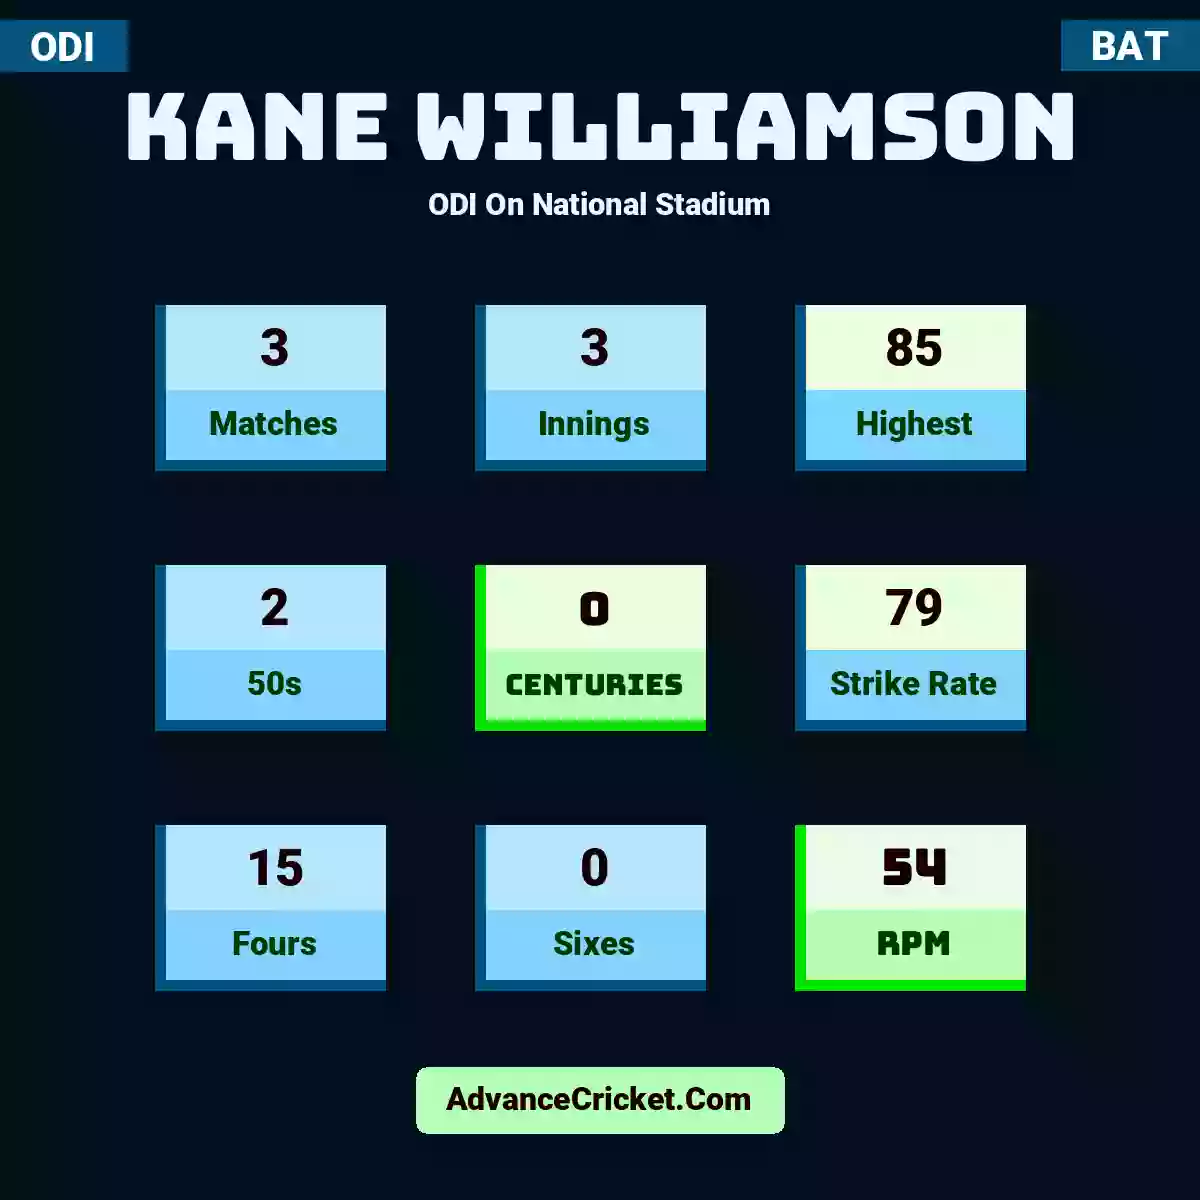 Kane Williamson ODI  On National Stadium, Kane Williamson played 3 matches, scored 85 runs as highest, 2 half-centuries, and 0 centuries, with a strike rate of 79. K.Williamson hit 15 fours and 0 sixes, with an RPM of 54.